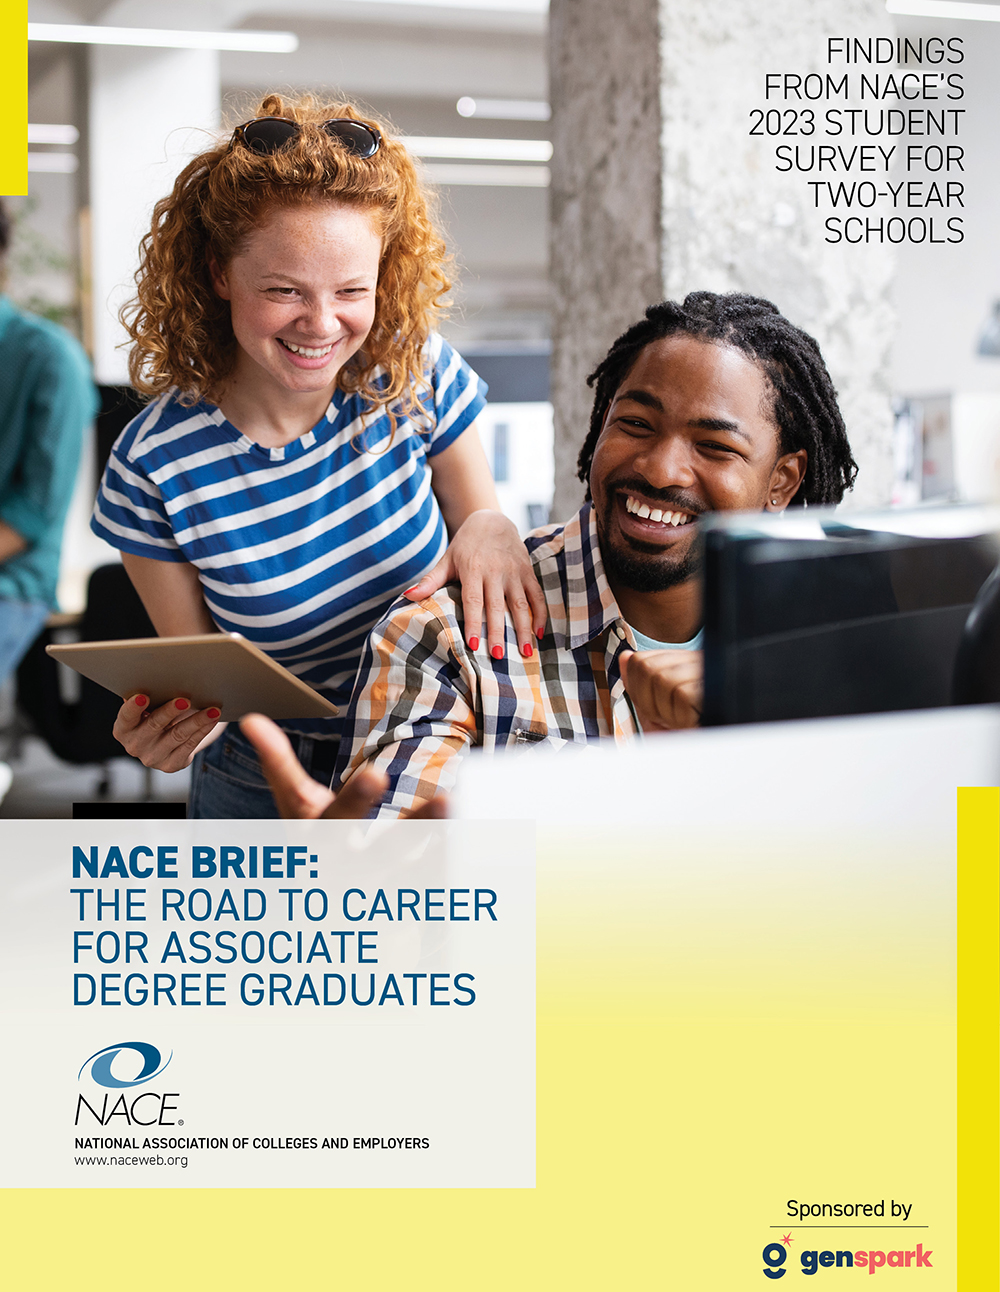 NACE Brief: The Road to Career for Associate Degree Graduates